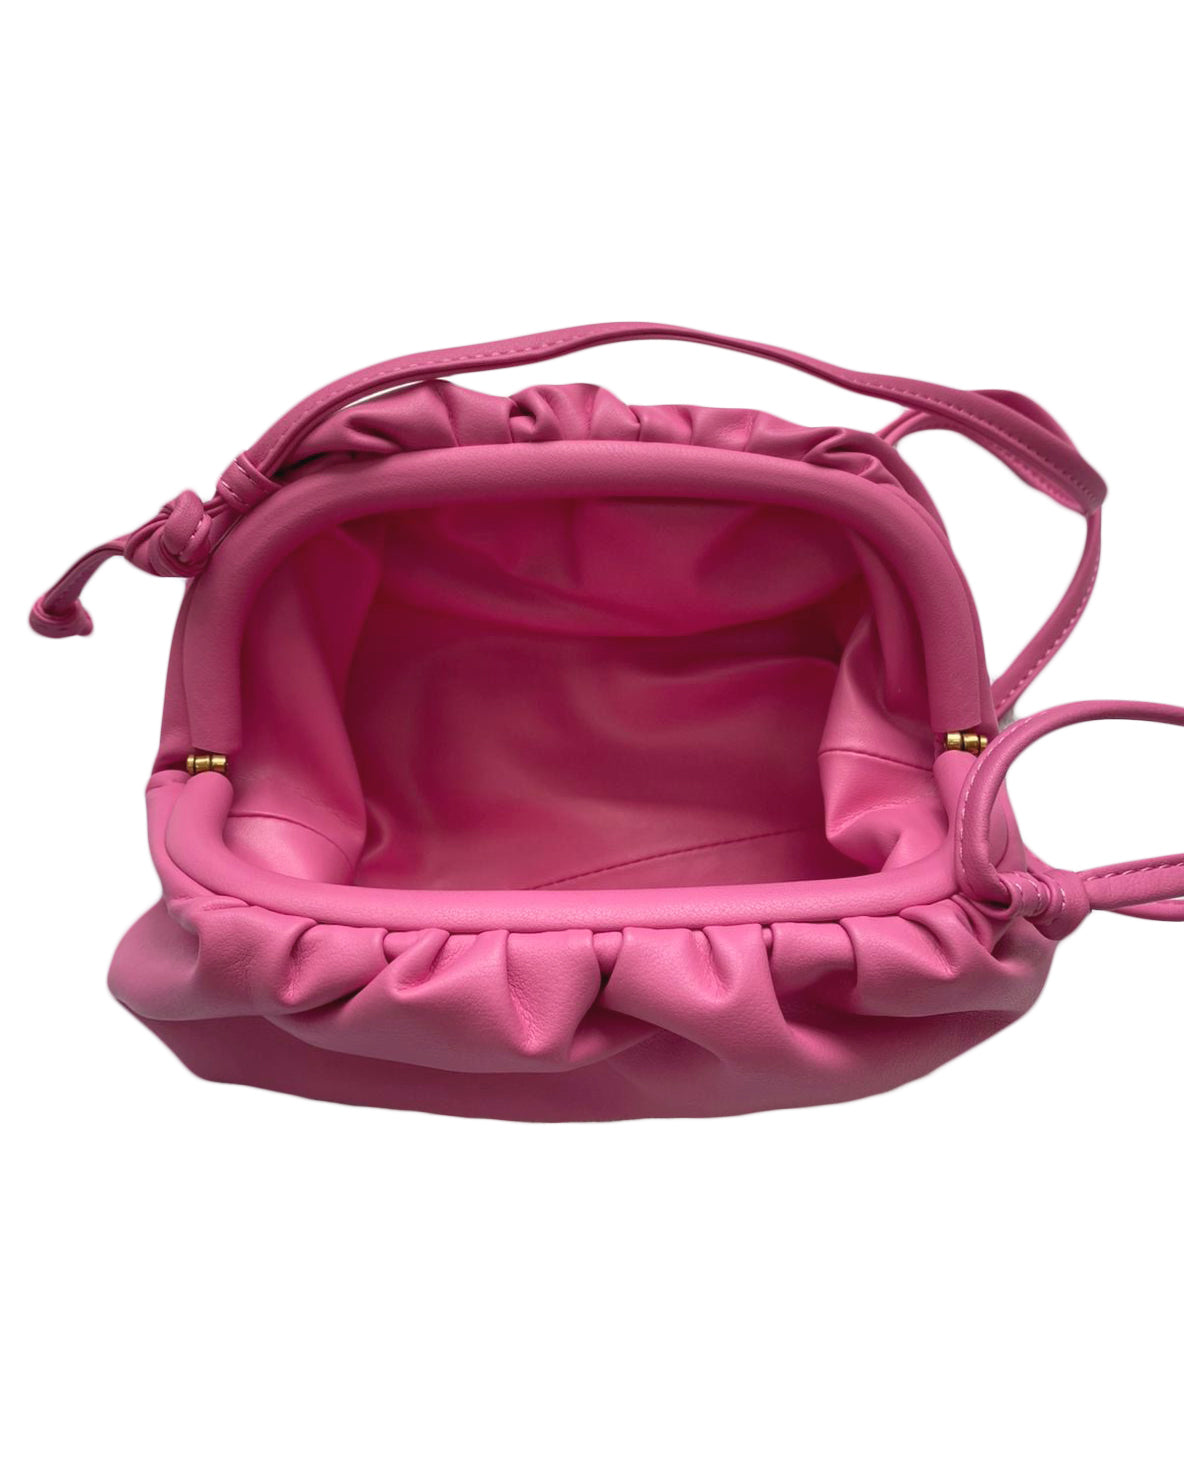 pink mini pouch leather cross bag *pre-order*